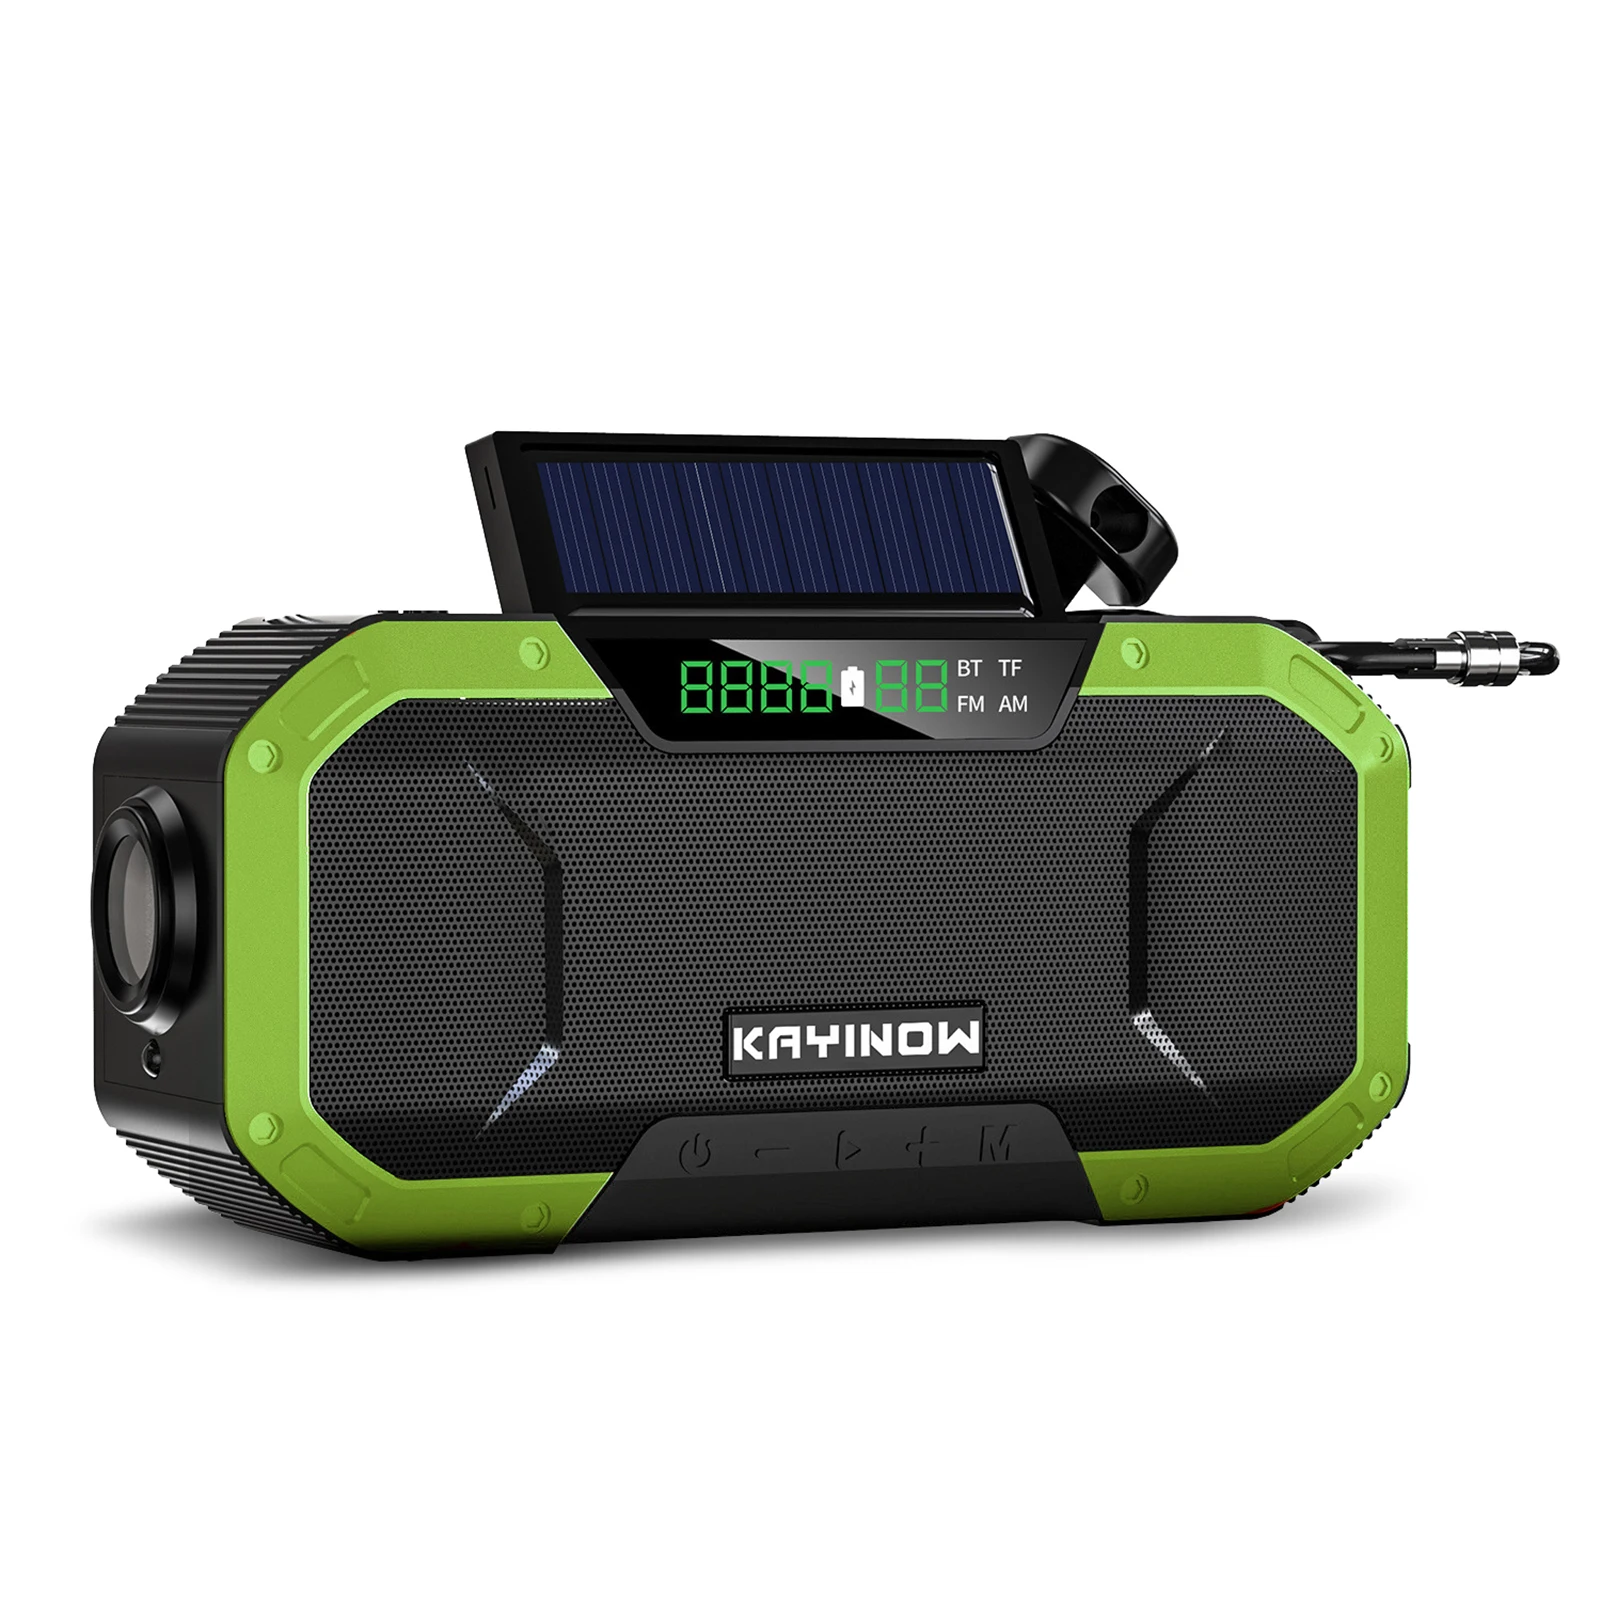 Cell Phone Charge 5000mah Solar/Self Powered AM/FM/NOAA Weather Radio Portable Wireless Speaker SOS Alarm for Home and Emergency LED Flashlight 2021 Upgraded TRIGOLDEN Emergency Crank Radio 